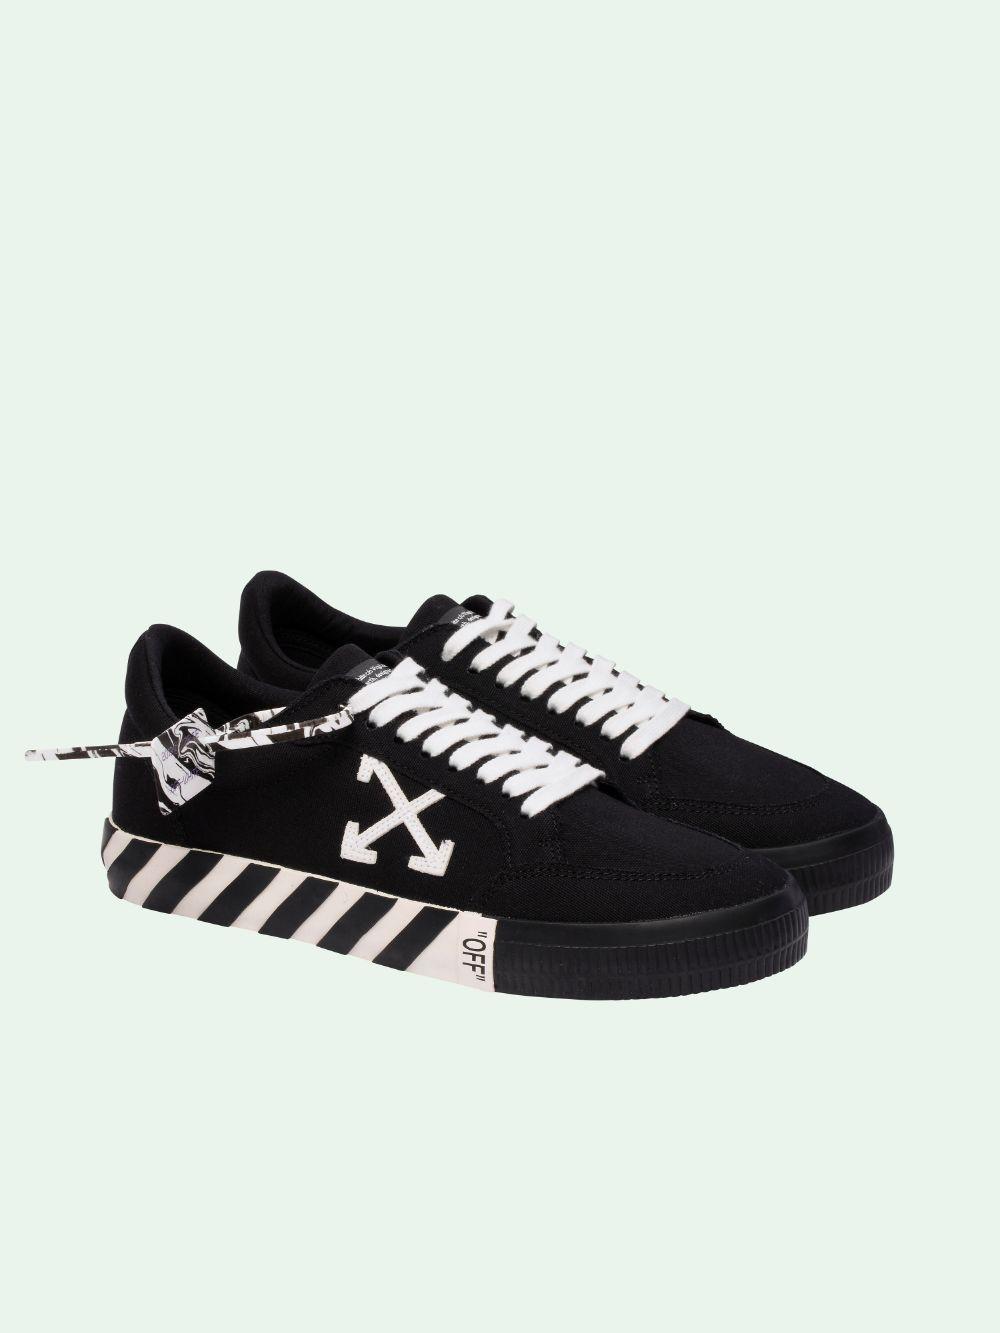 Off-White Virgil Abloh Vulcan Low Trainers in Black White (Black) for Men - Save 66% - Lyst